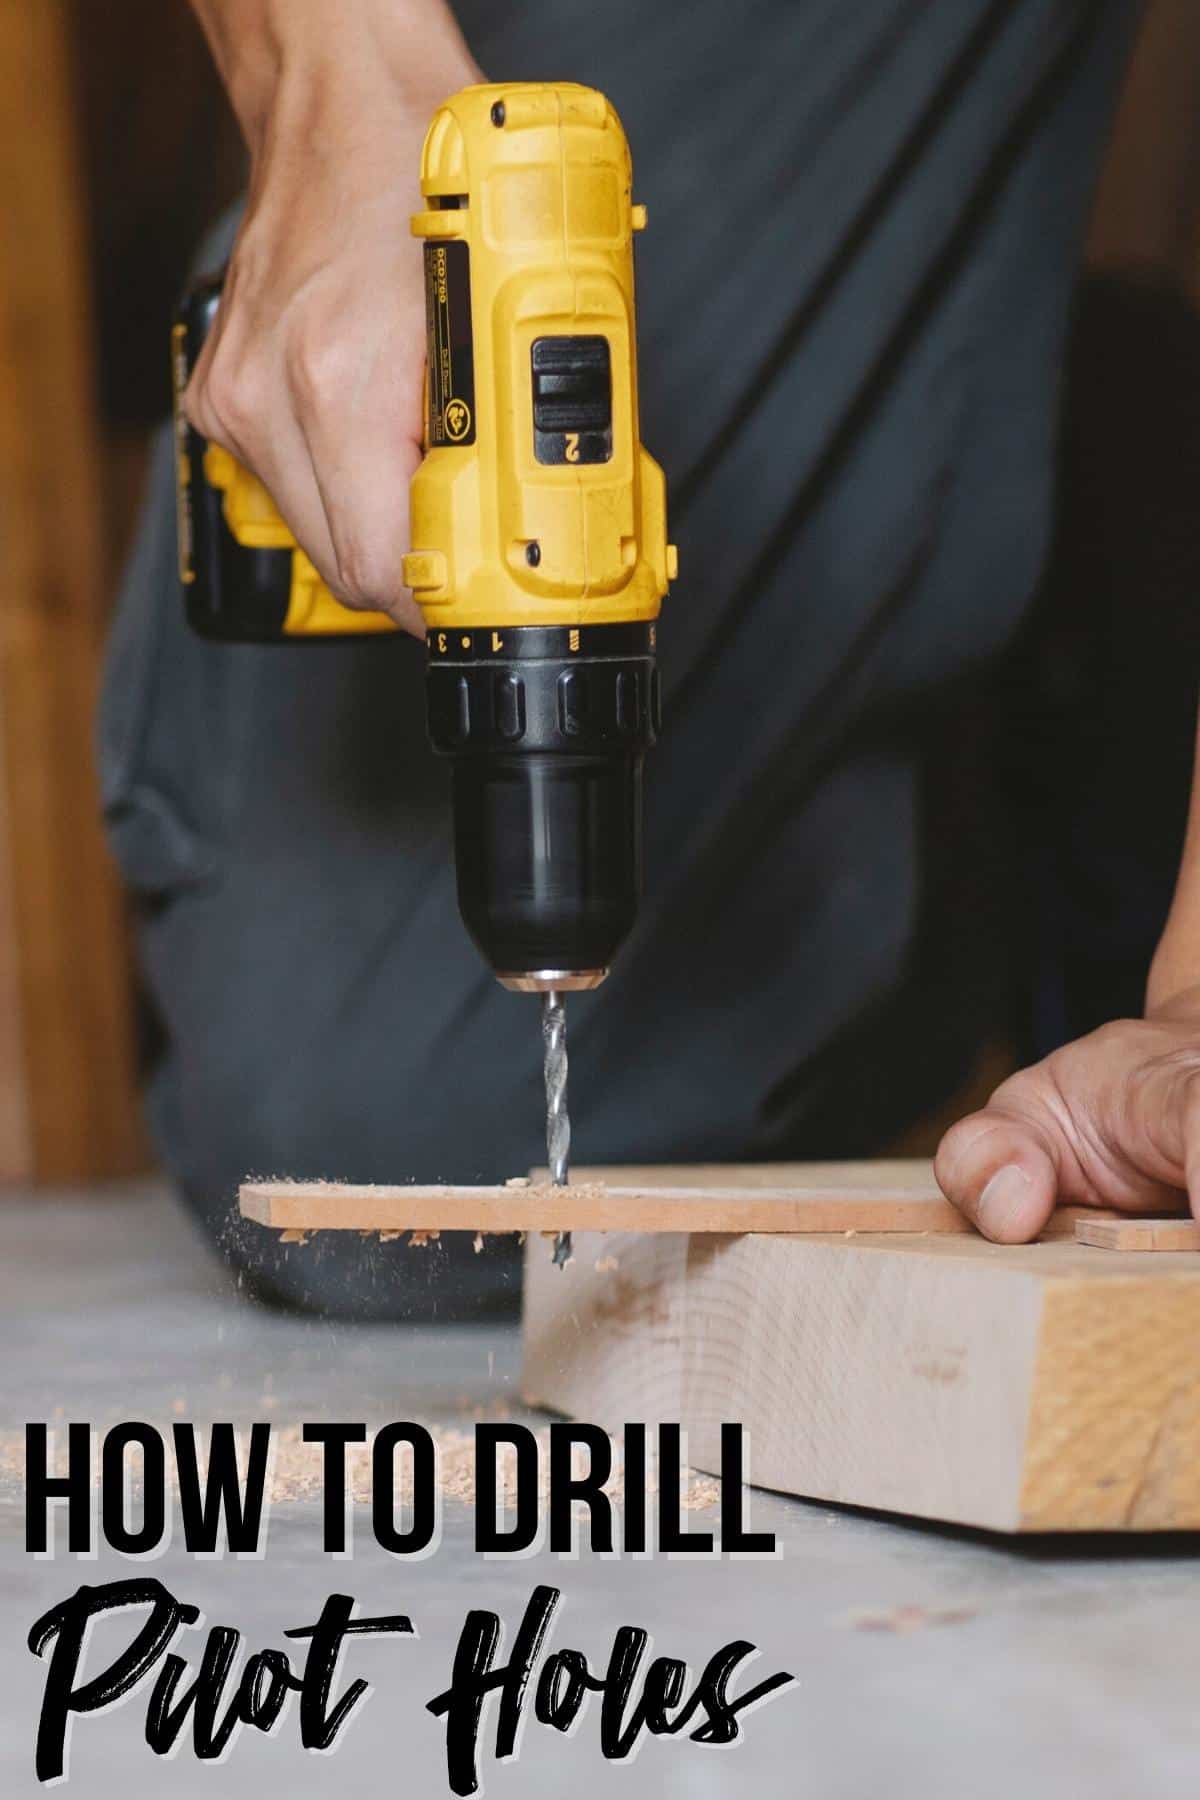 How to drill pilot holes